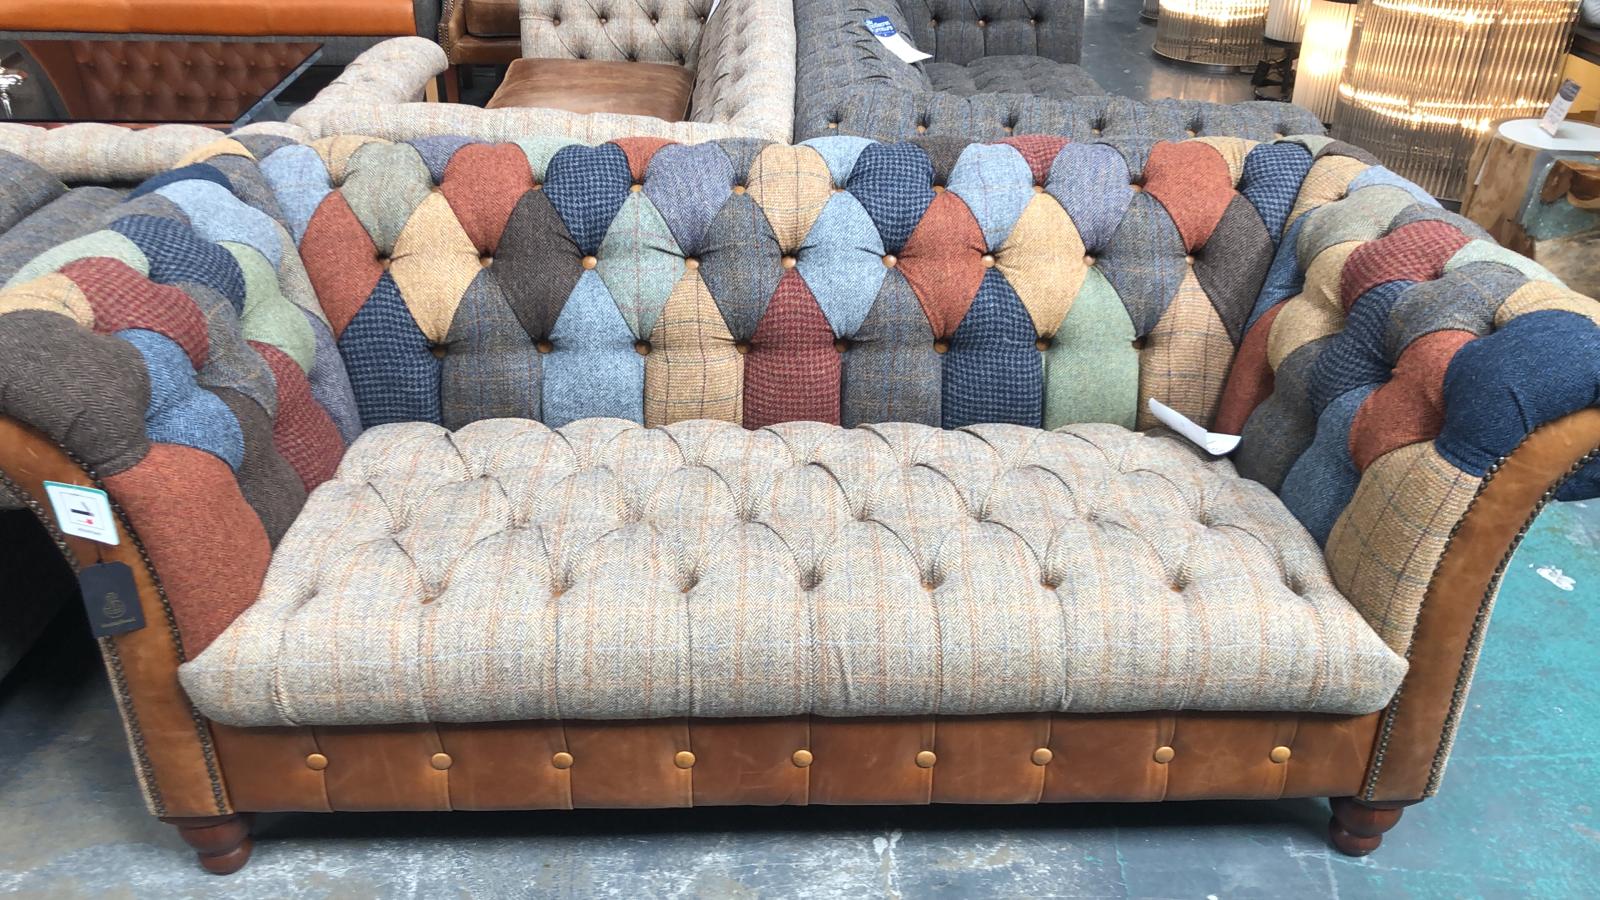 Harlequin 3 seater and 4 seater sofas from Top Secret Furniture